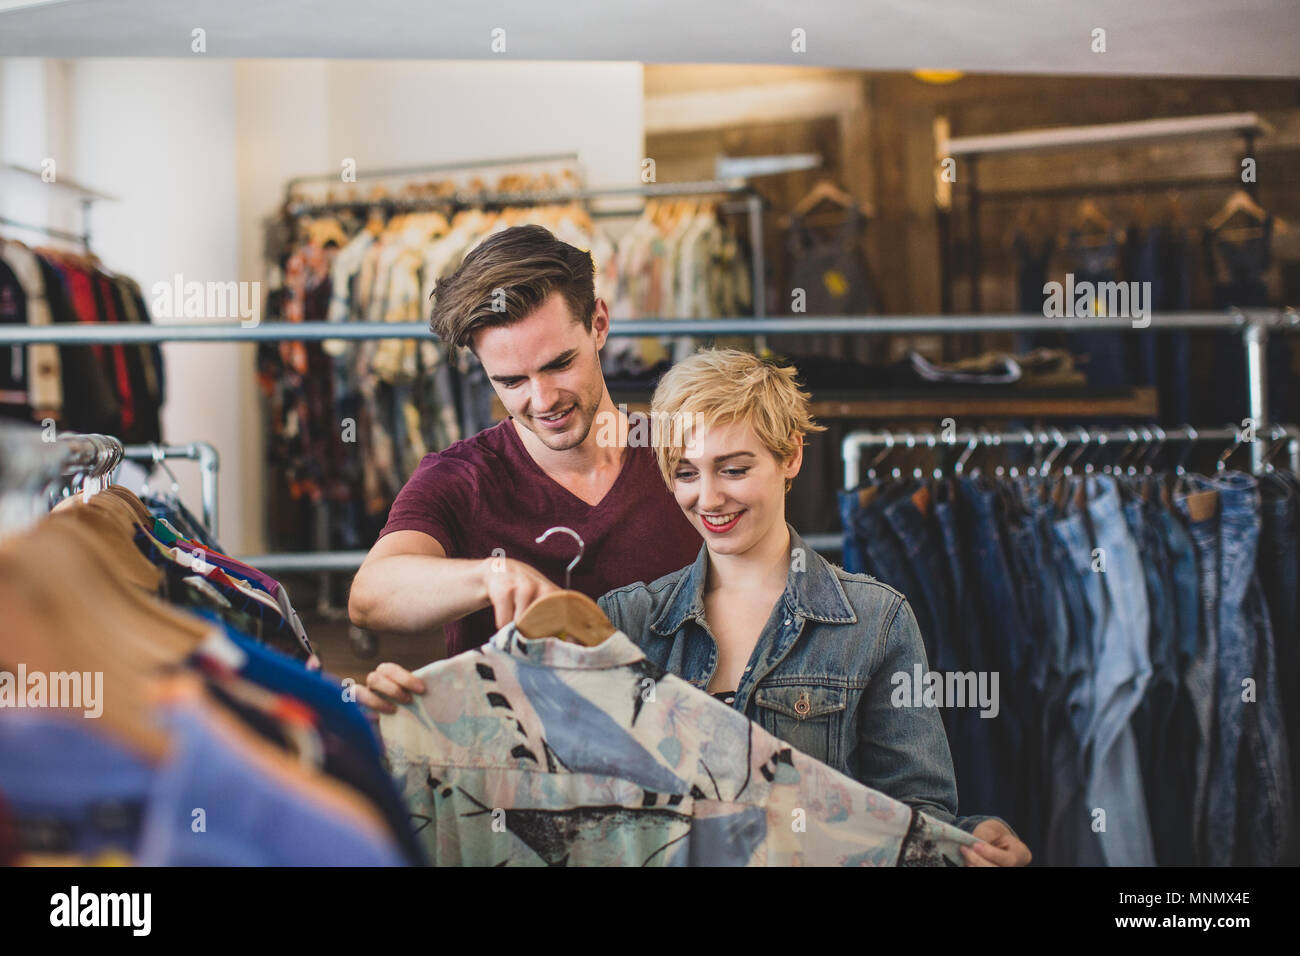 Millennial couple in a vintage clothing store Stock Photo